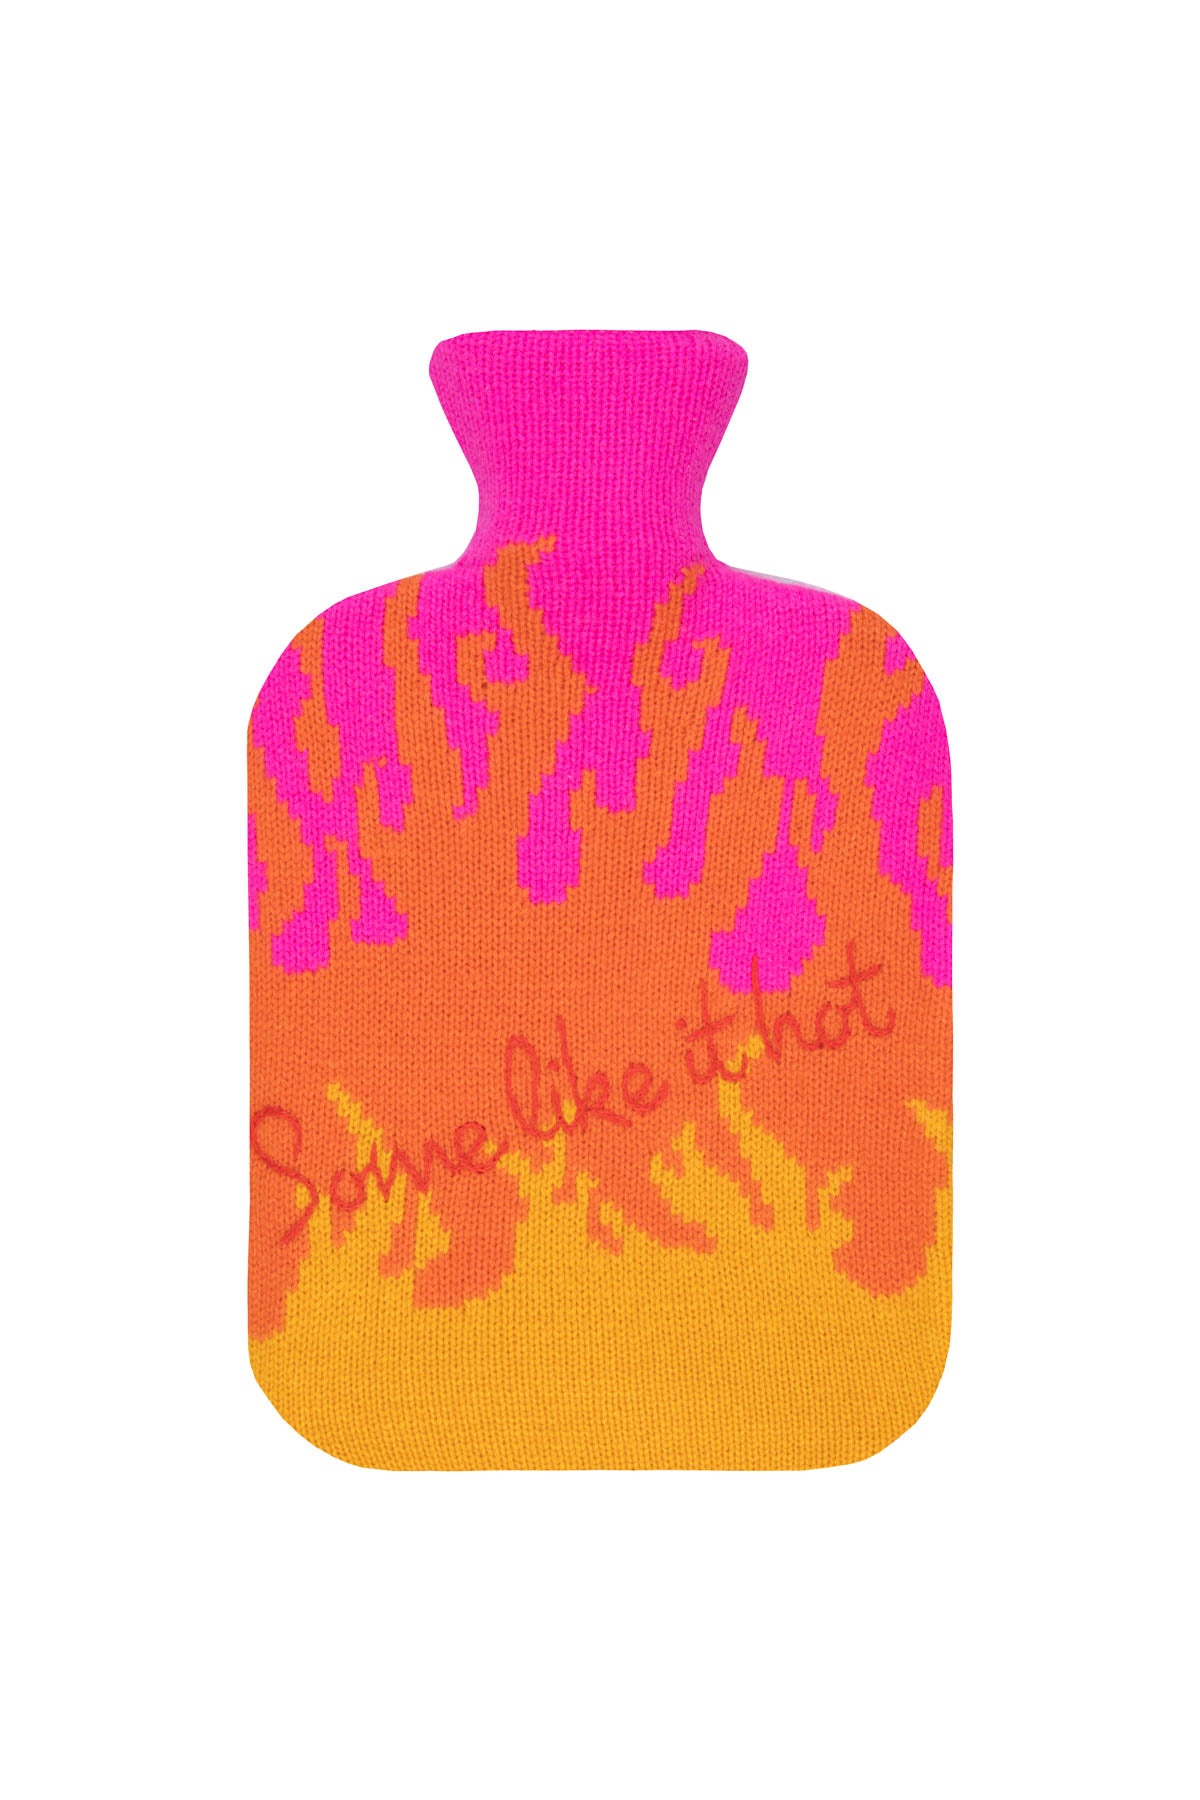 Flames Hot Water Bottle Cover -  Pink